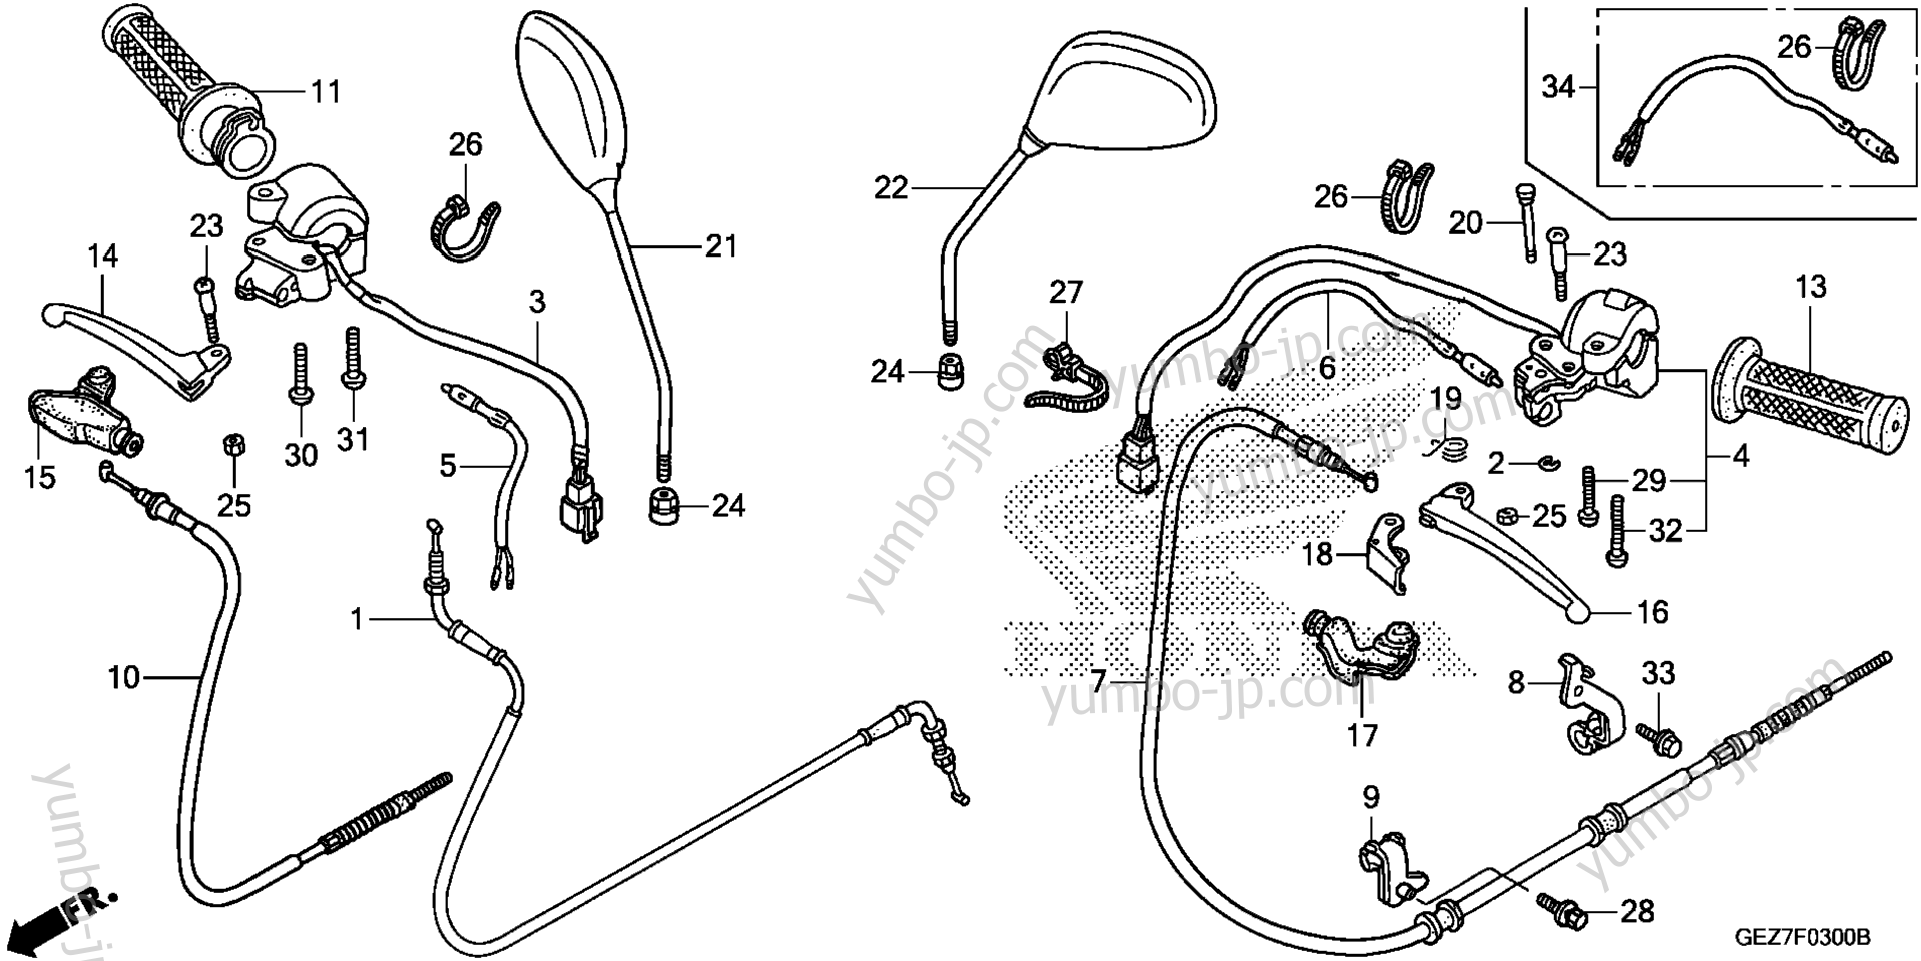 HANDLE LEVER / SWITCH / CABLE for scooters HONDA NPS50 A 2007 year